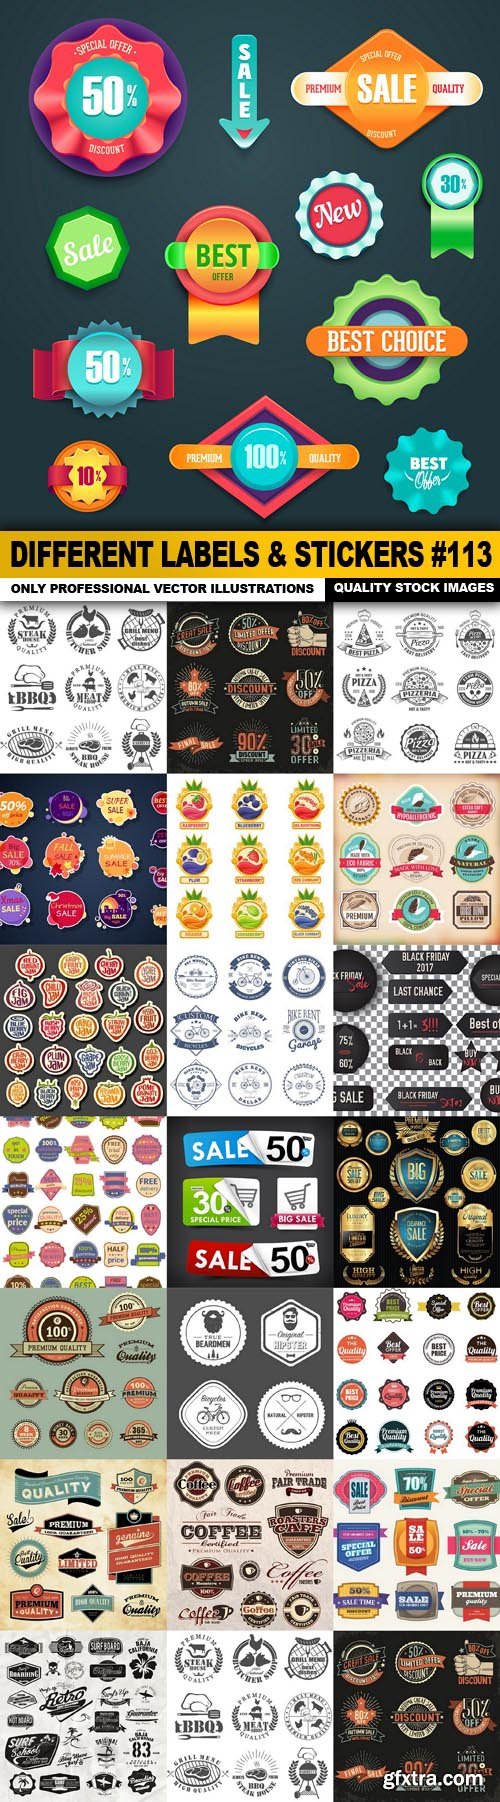 Different Labels & Stickers #113 - 20 Vector